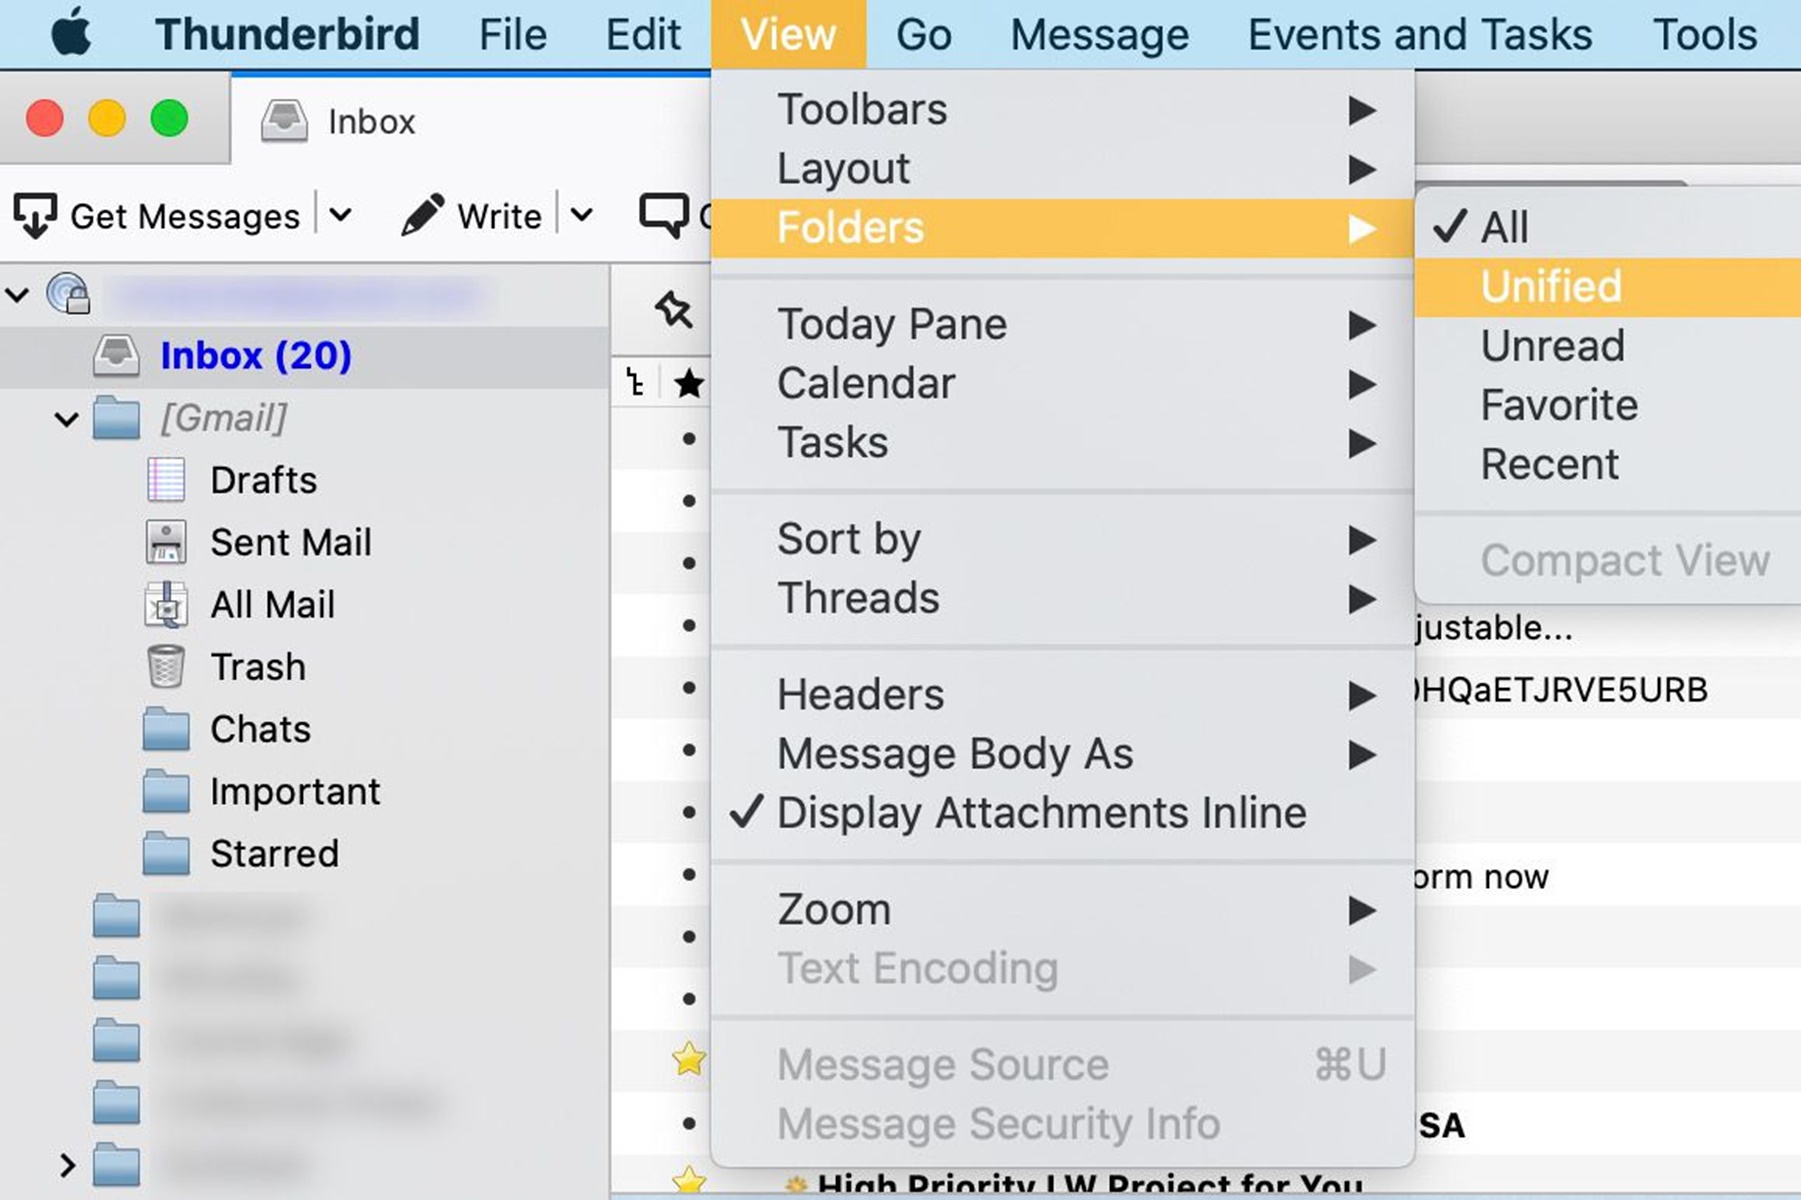 How To Read Emails In A Unified Inbox In Thunderbird